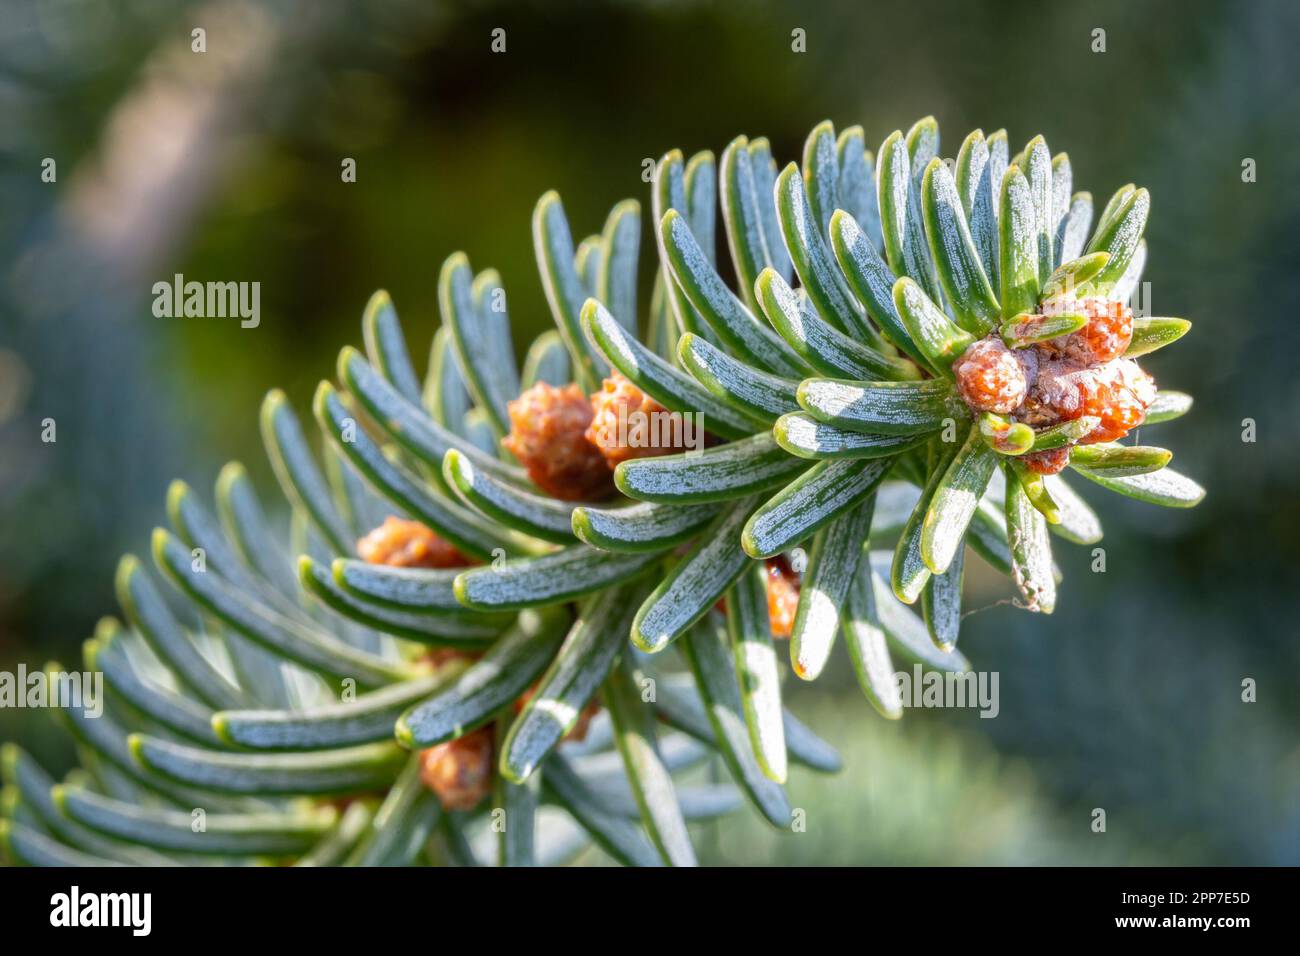 Branch with buds and needles covered with wax of a fir (Abies) tree Stock Photo